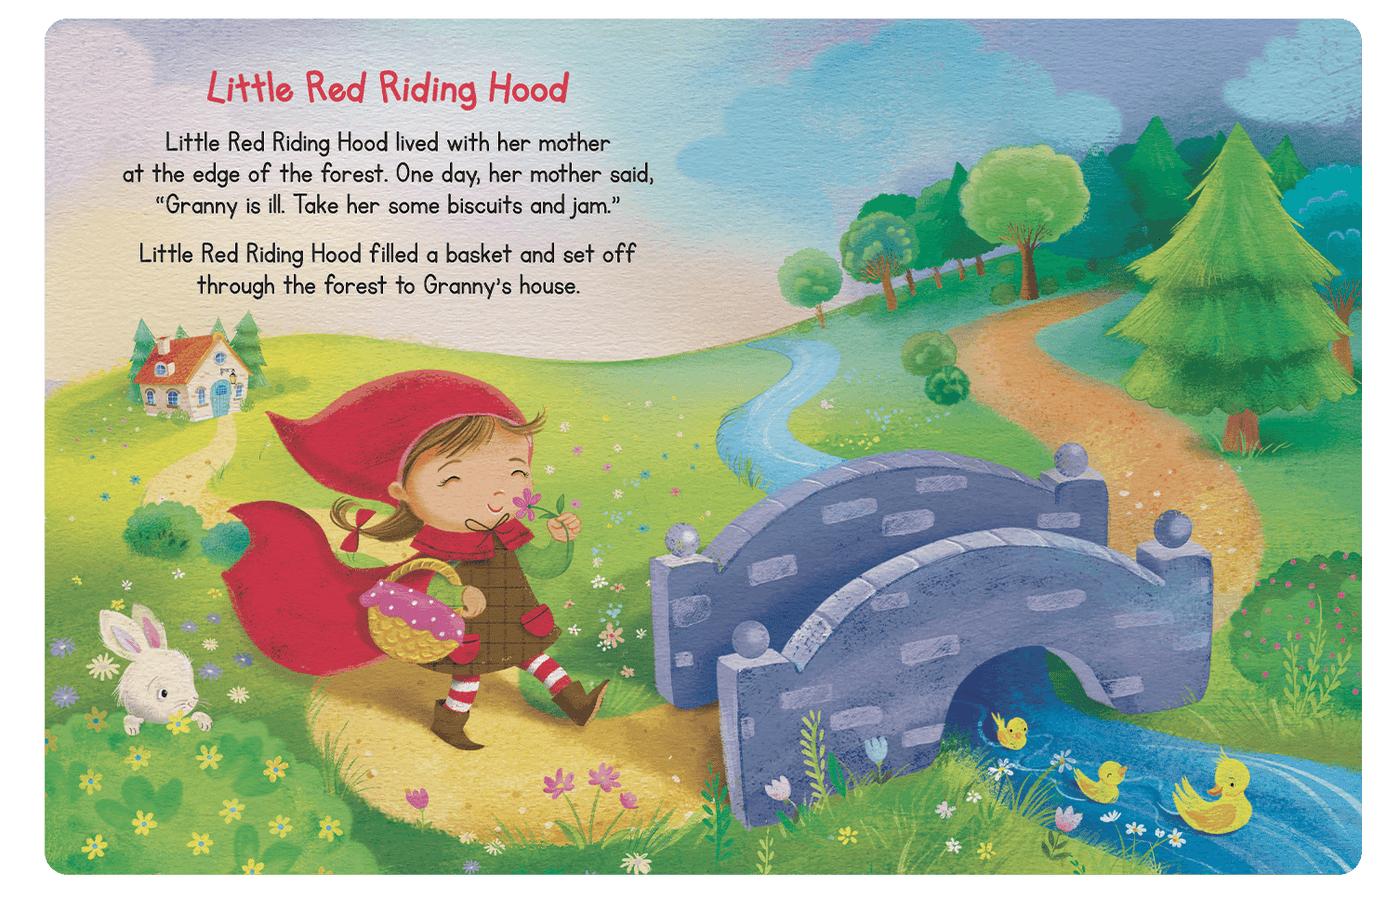 Little Hippo Books Children's Padded Board Book My First Book of Fairy Tales Little Red Riding Hood Three Little Pigs Ugly Duckling Sleep Bedtime Story family classic